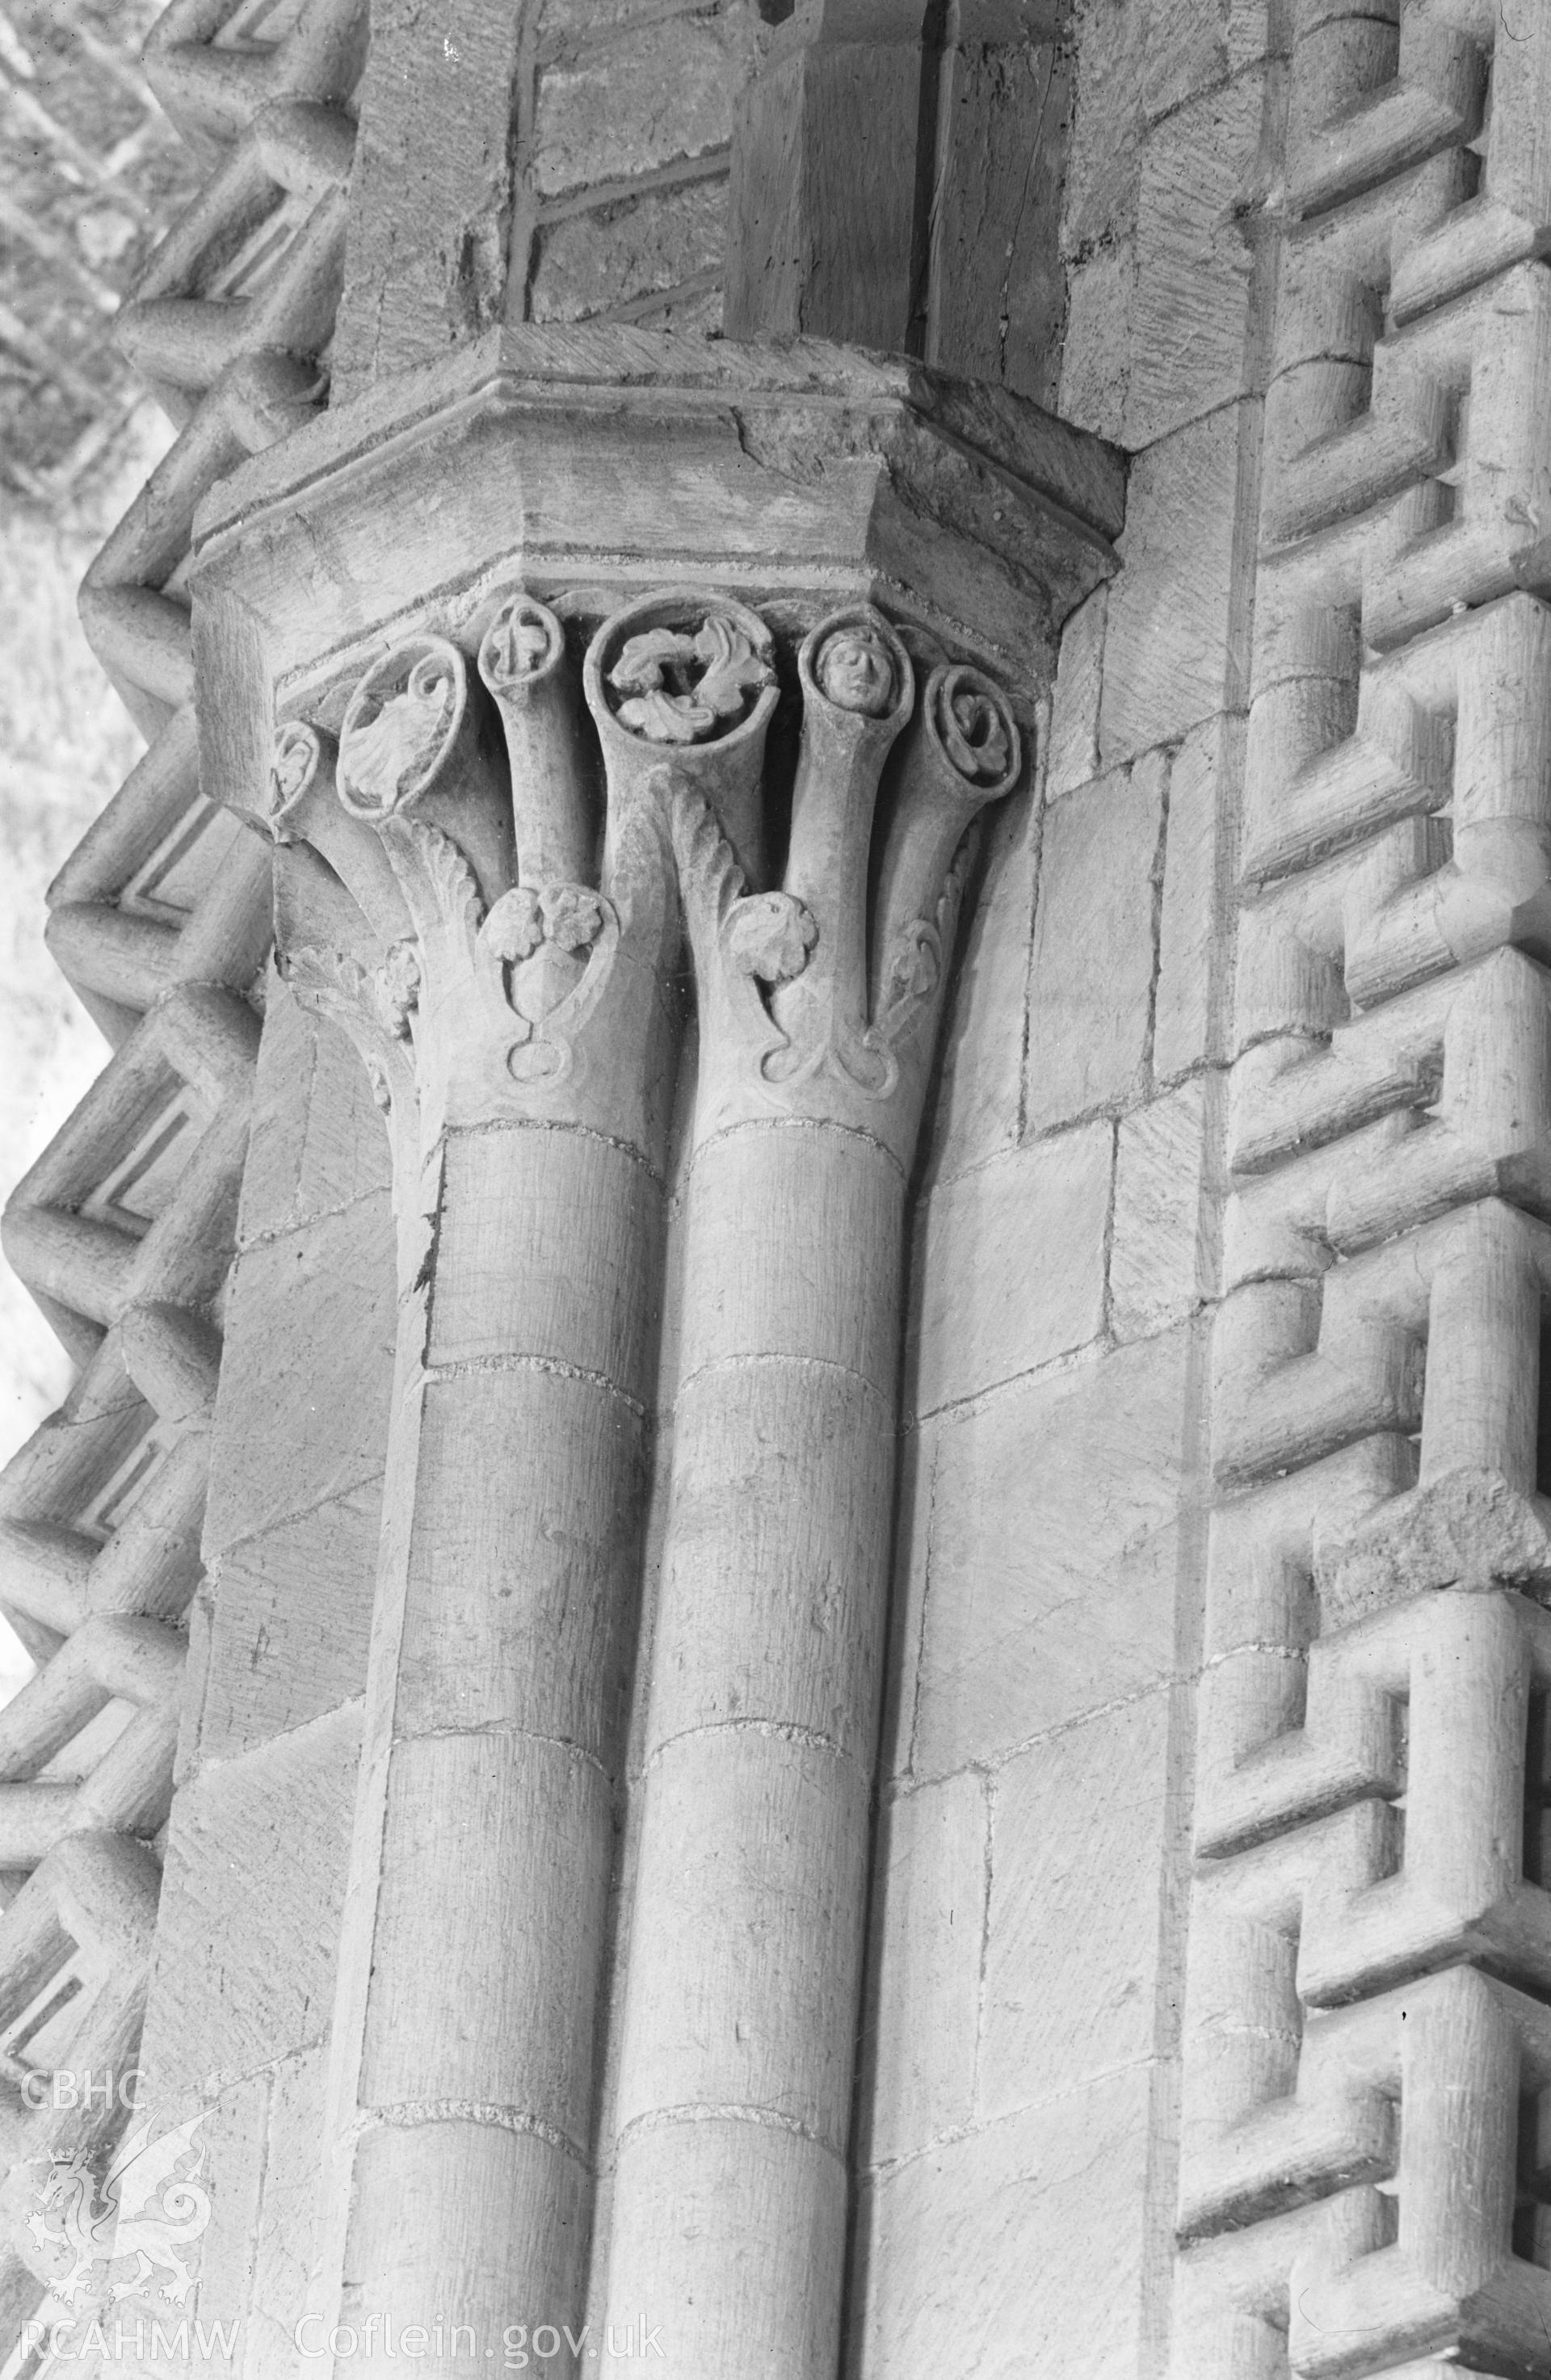 Digital copy of a black and white nitrate negative showing detail of capital at St. David's Cathedral, taken by E.W. Lovegrove, July 1936